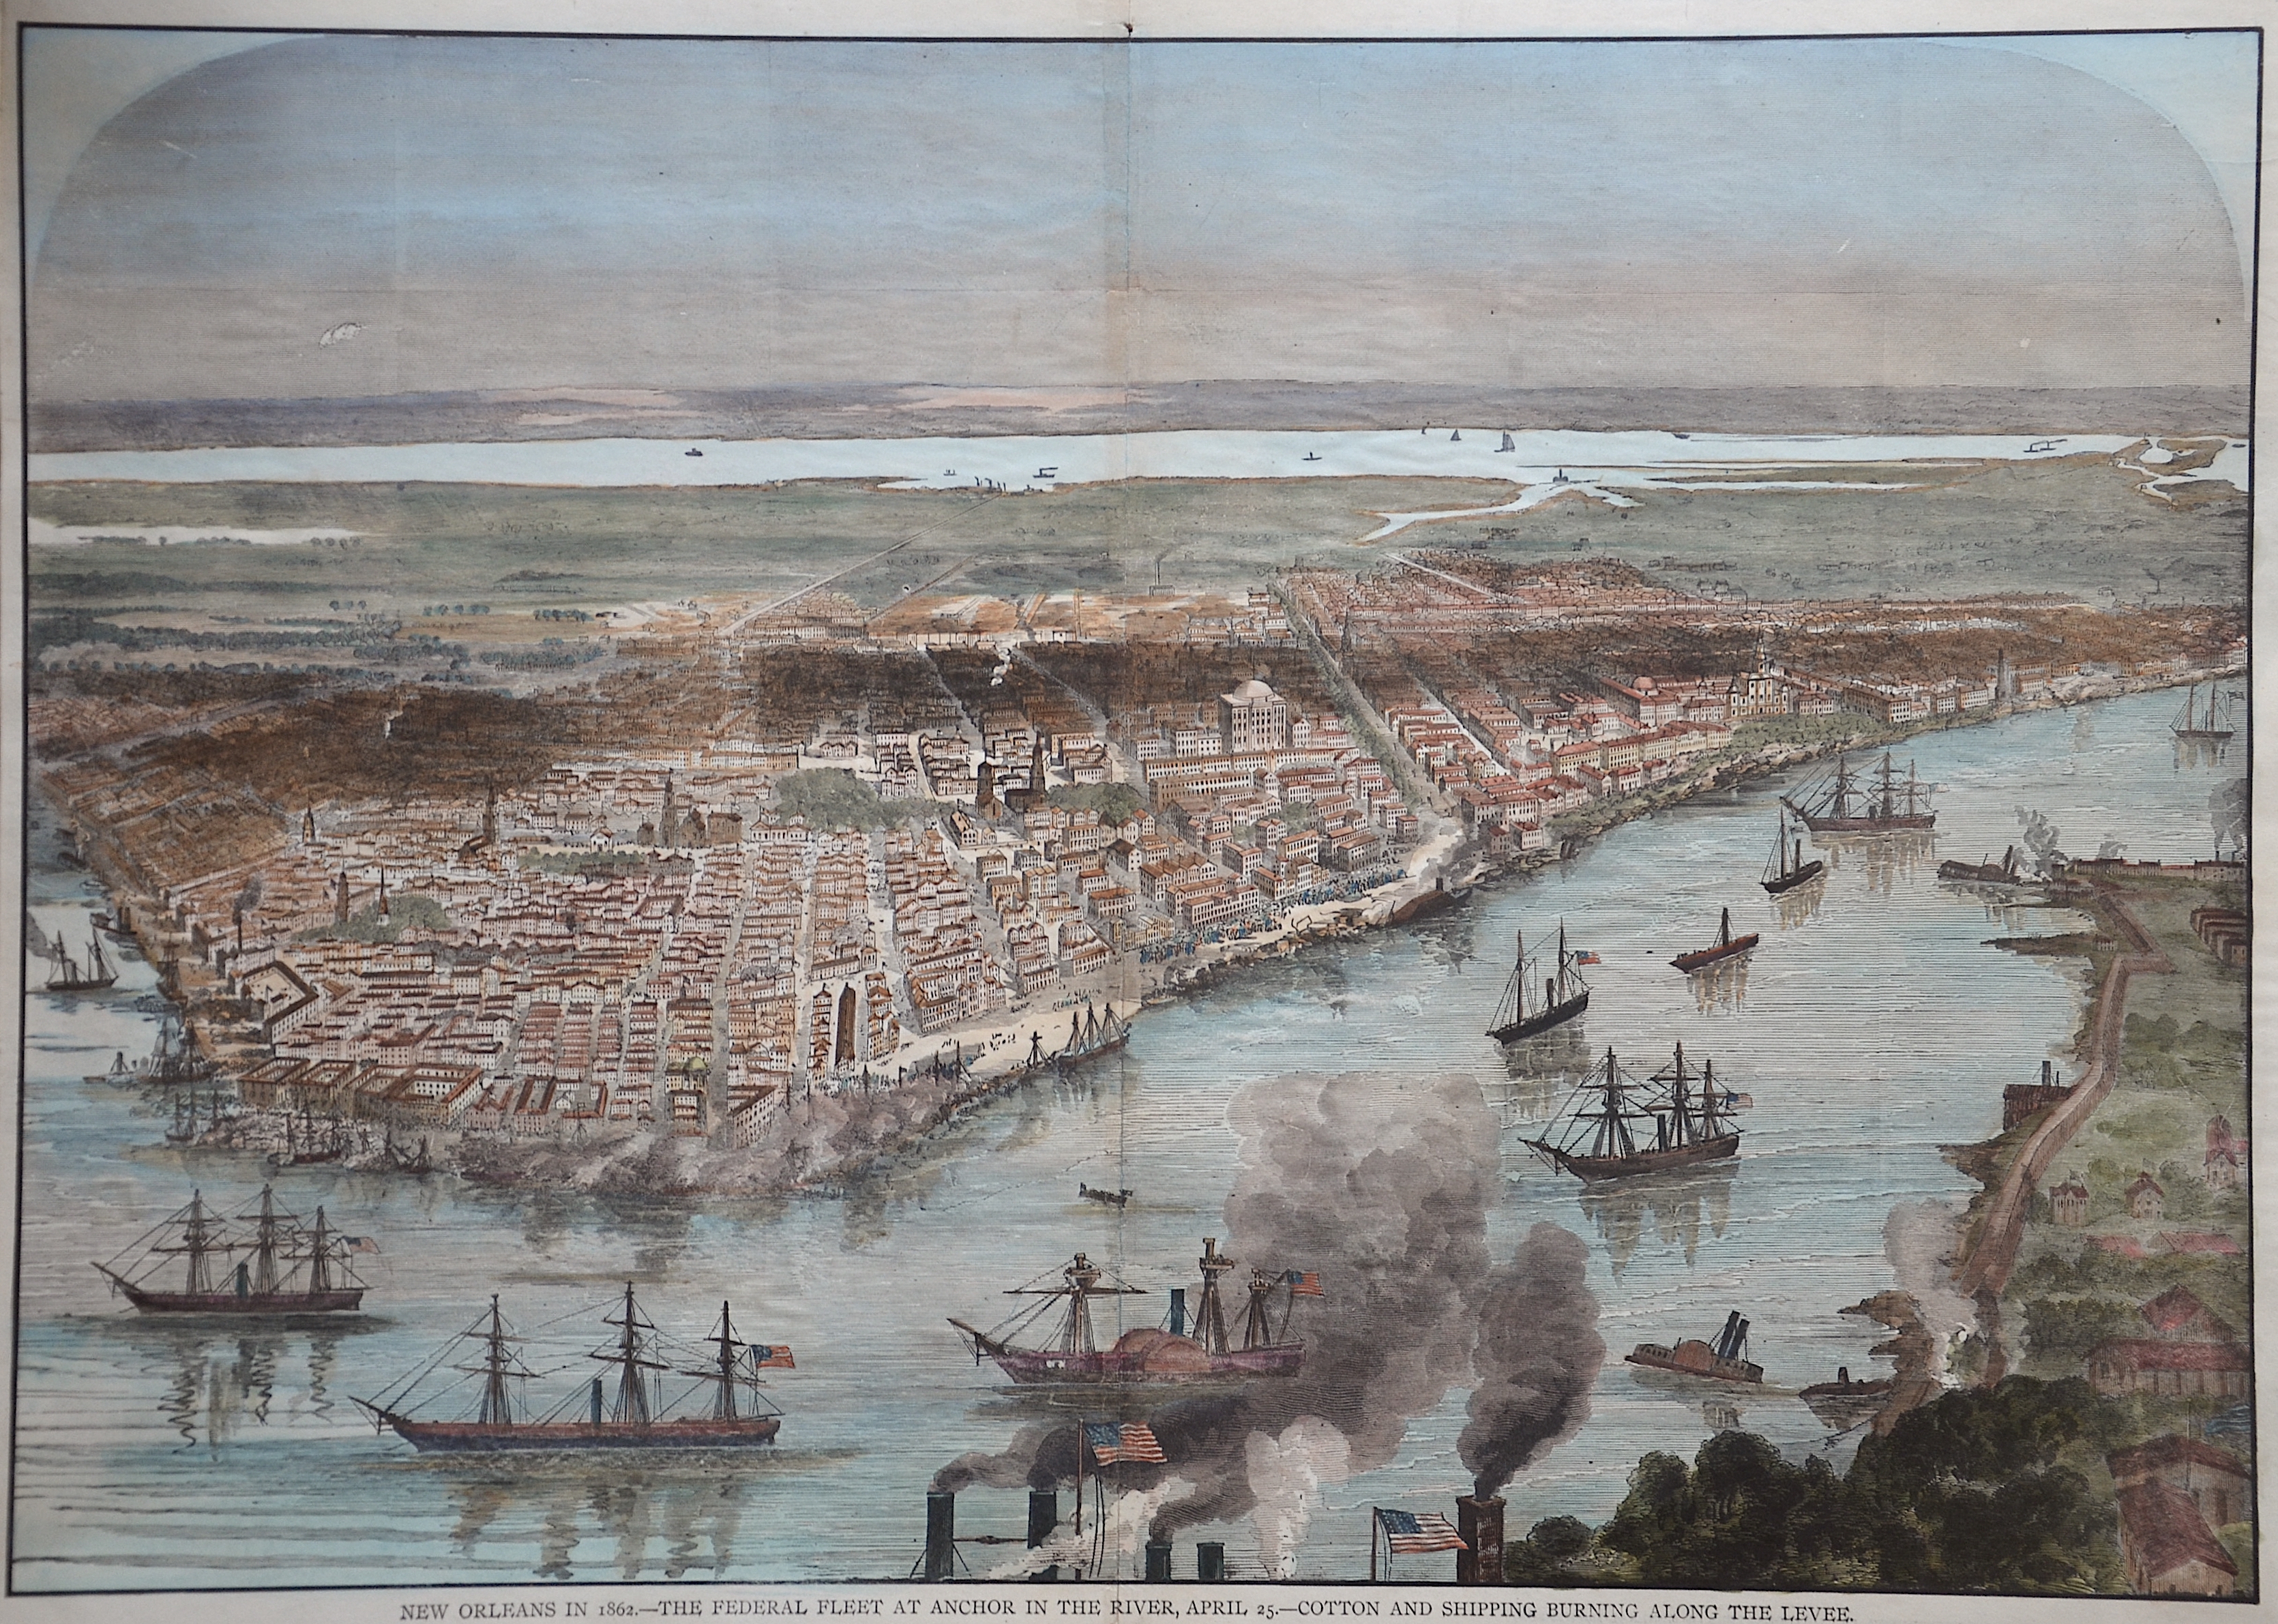 Anonymus  New Orleans in 1862. – The federal fleet at anchor in the river, April 25. Cotton and shipping burning along the levee.